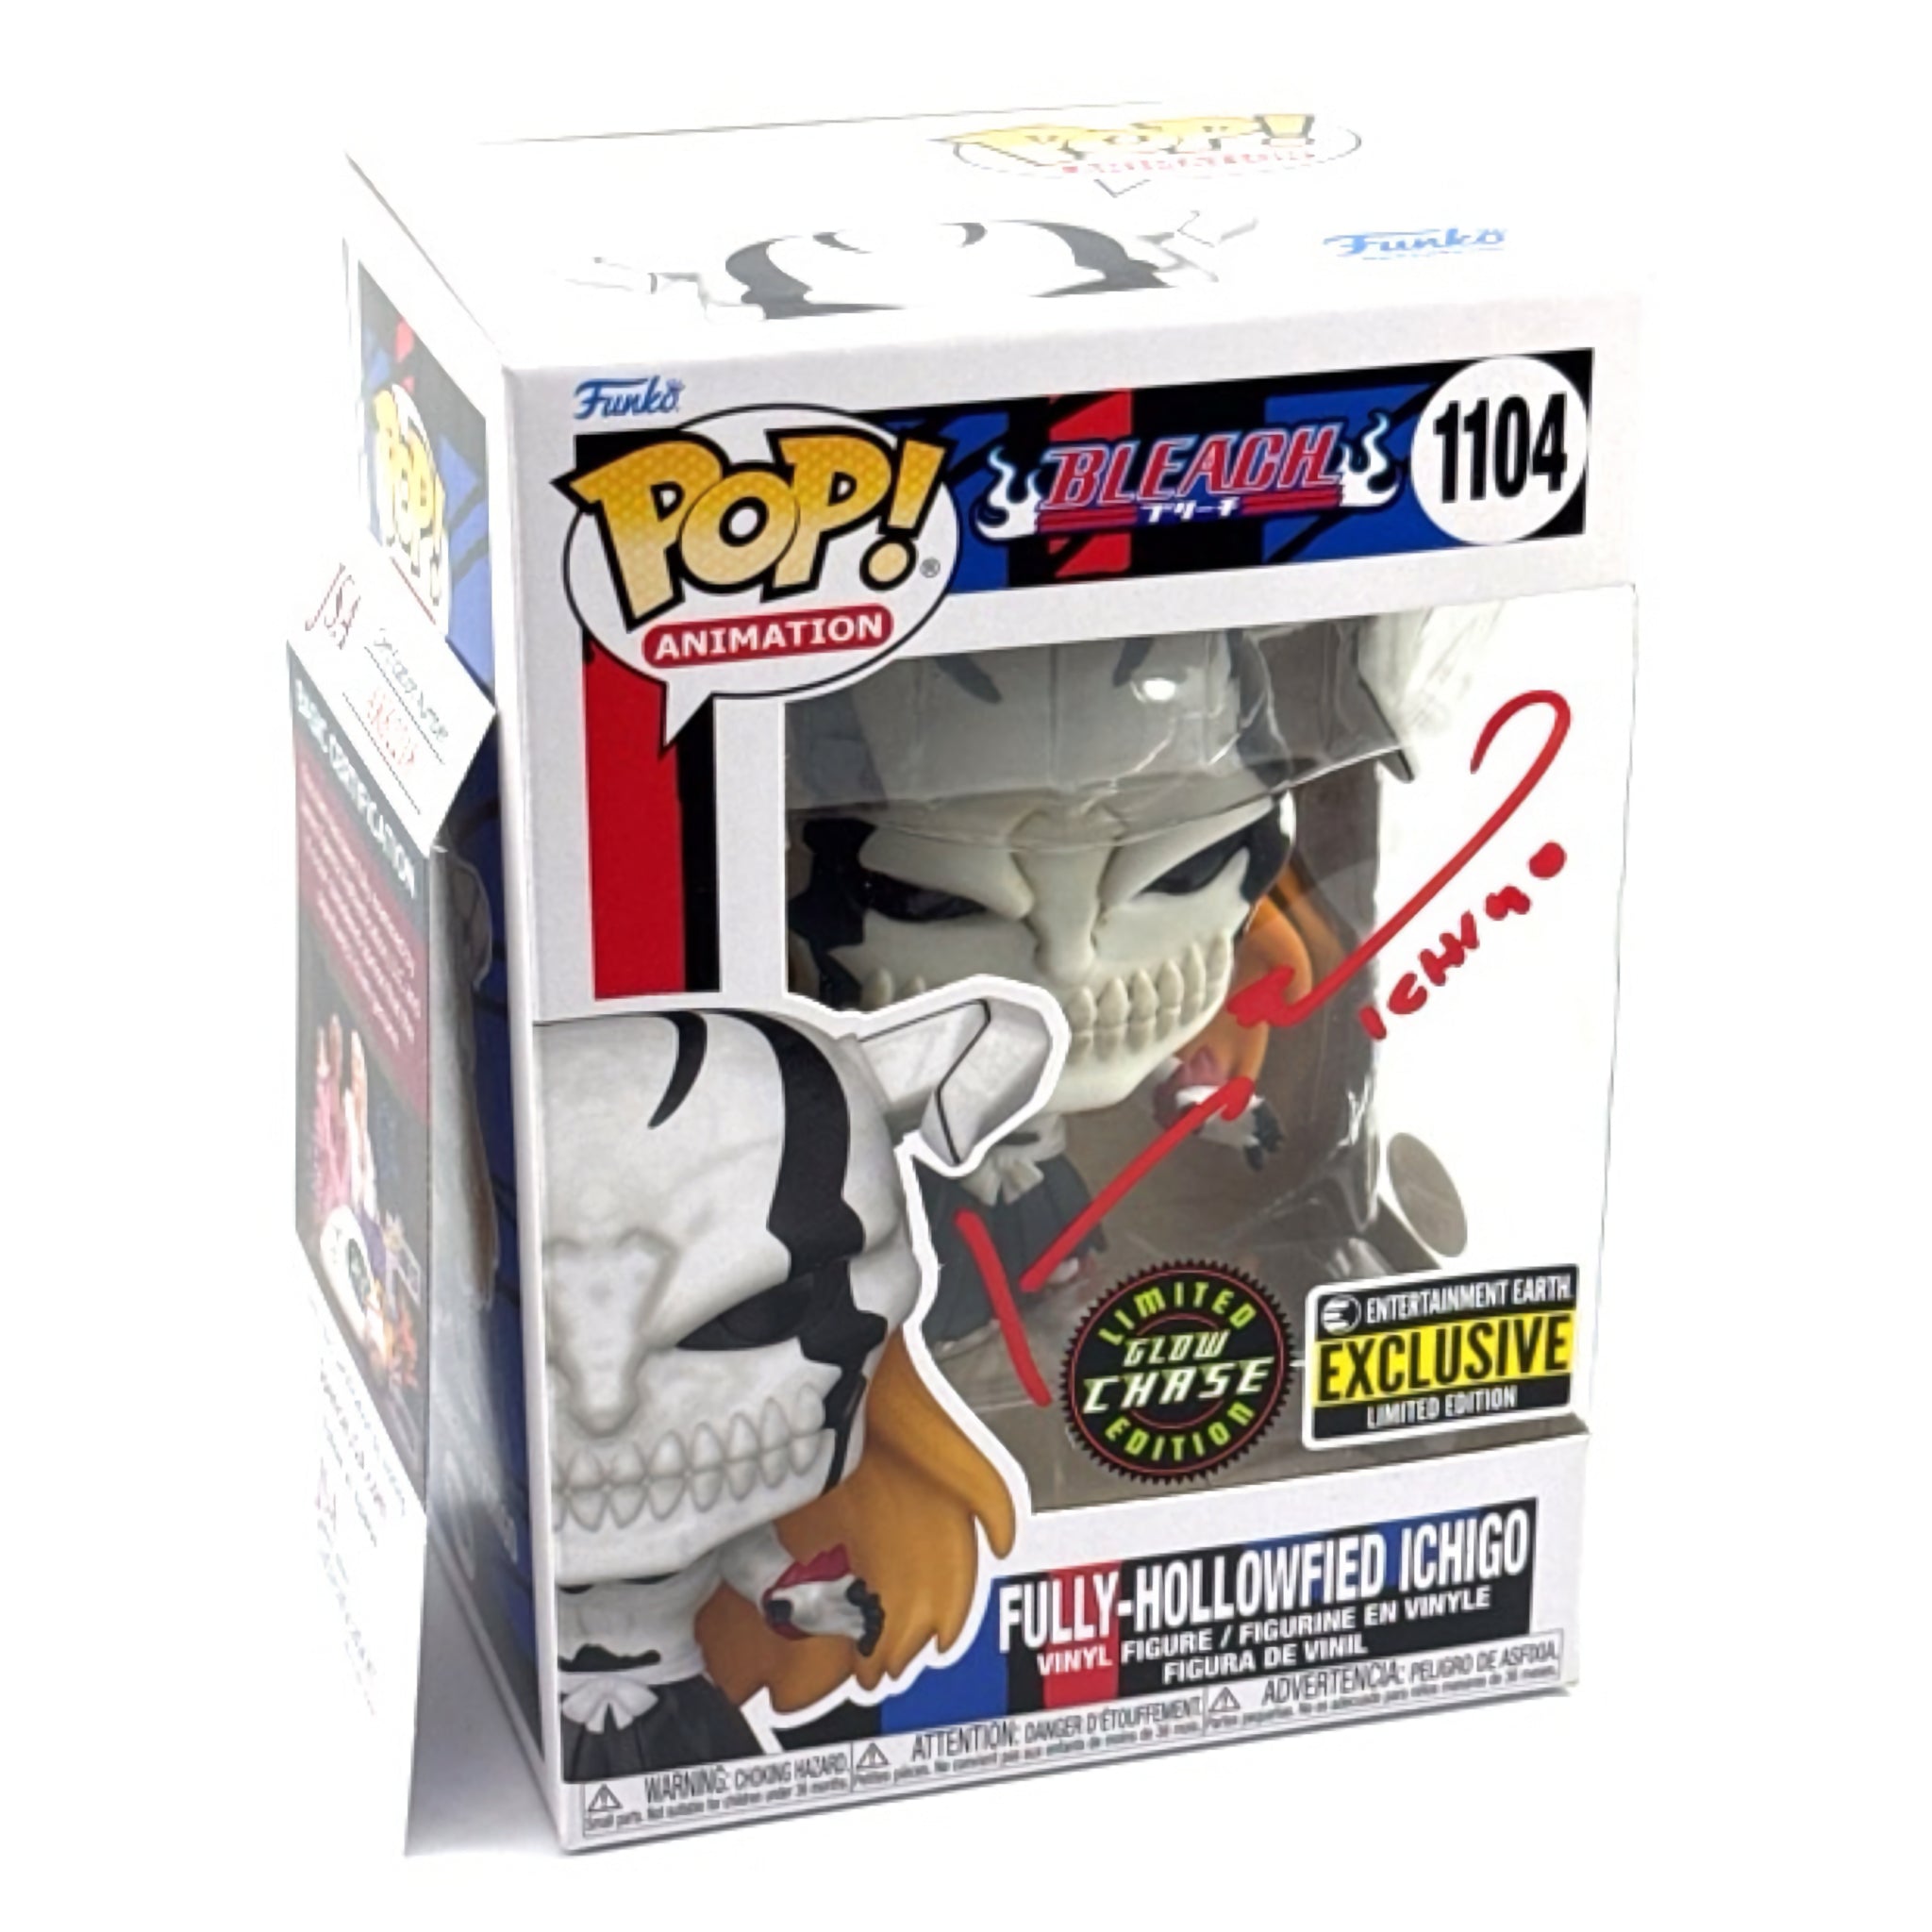 Fully-Hollowfied Ichigo GITD Funko Pop! CHASE EE EXCLUSIVE (Signed by Johnny Yong Bosch)